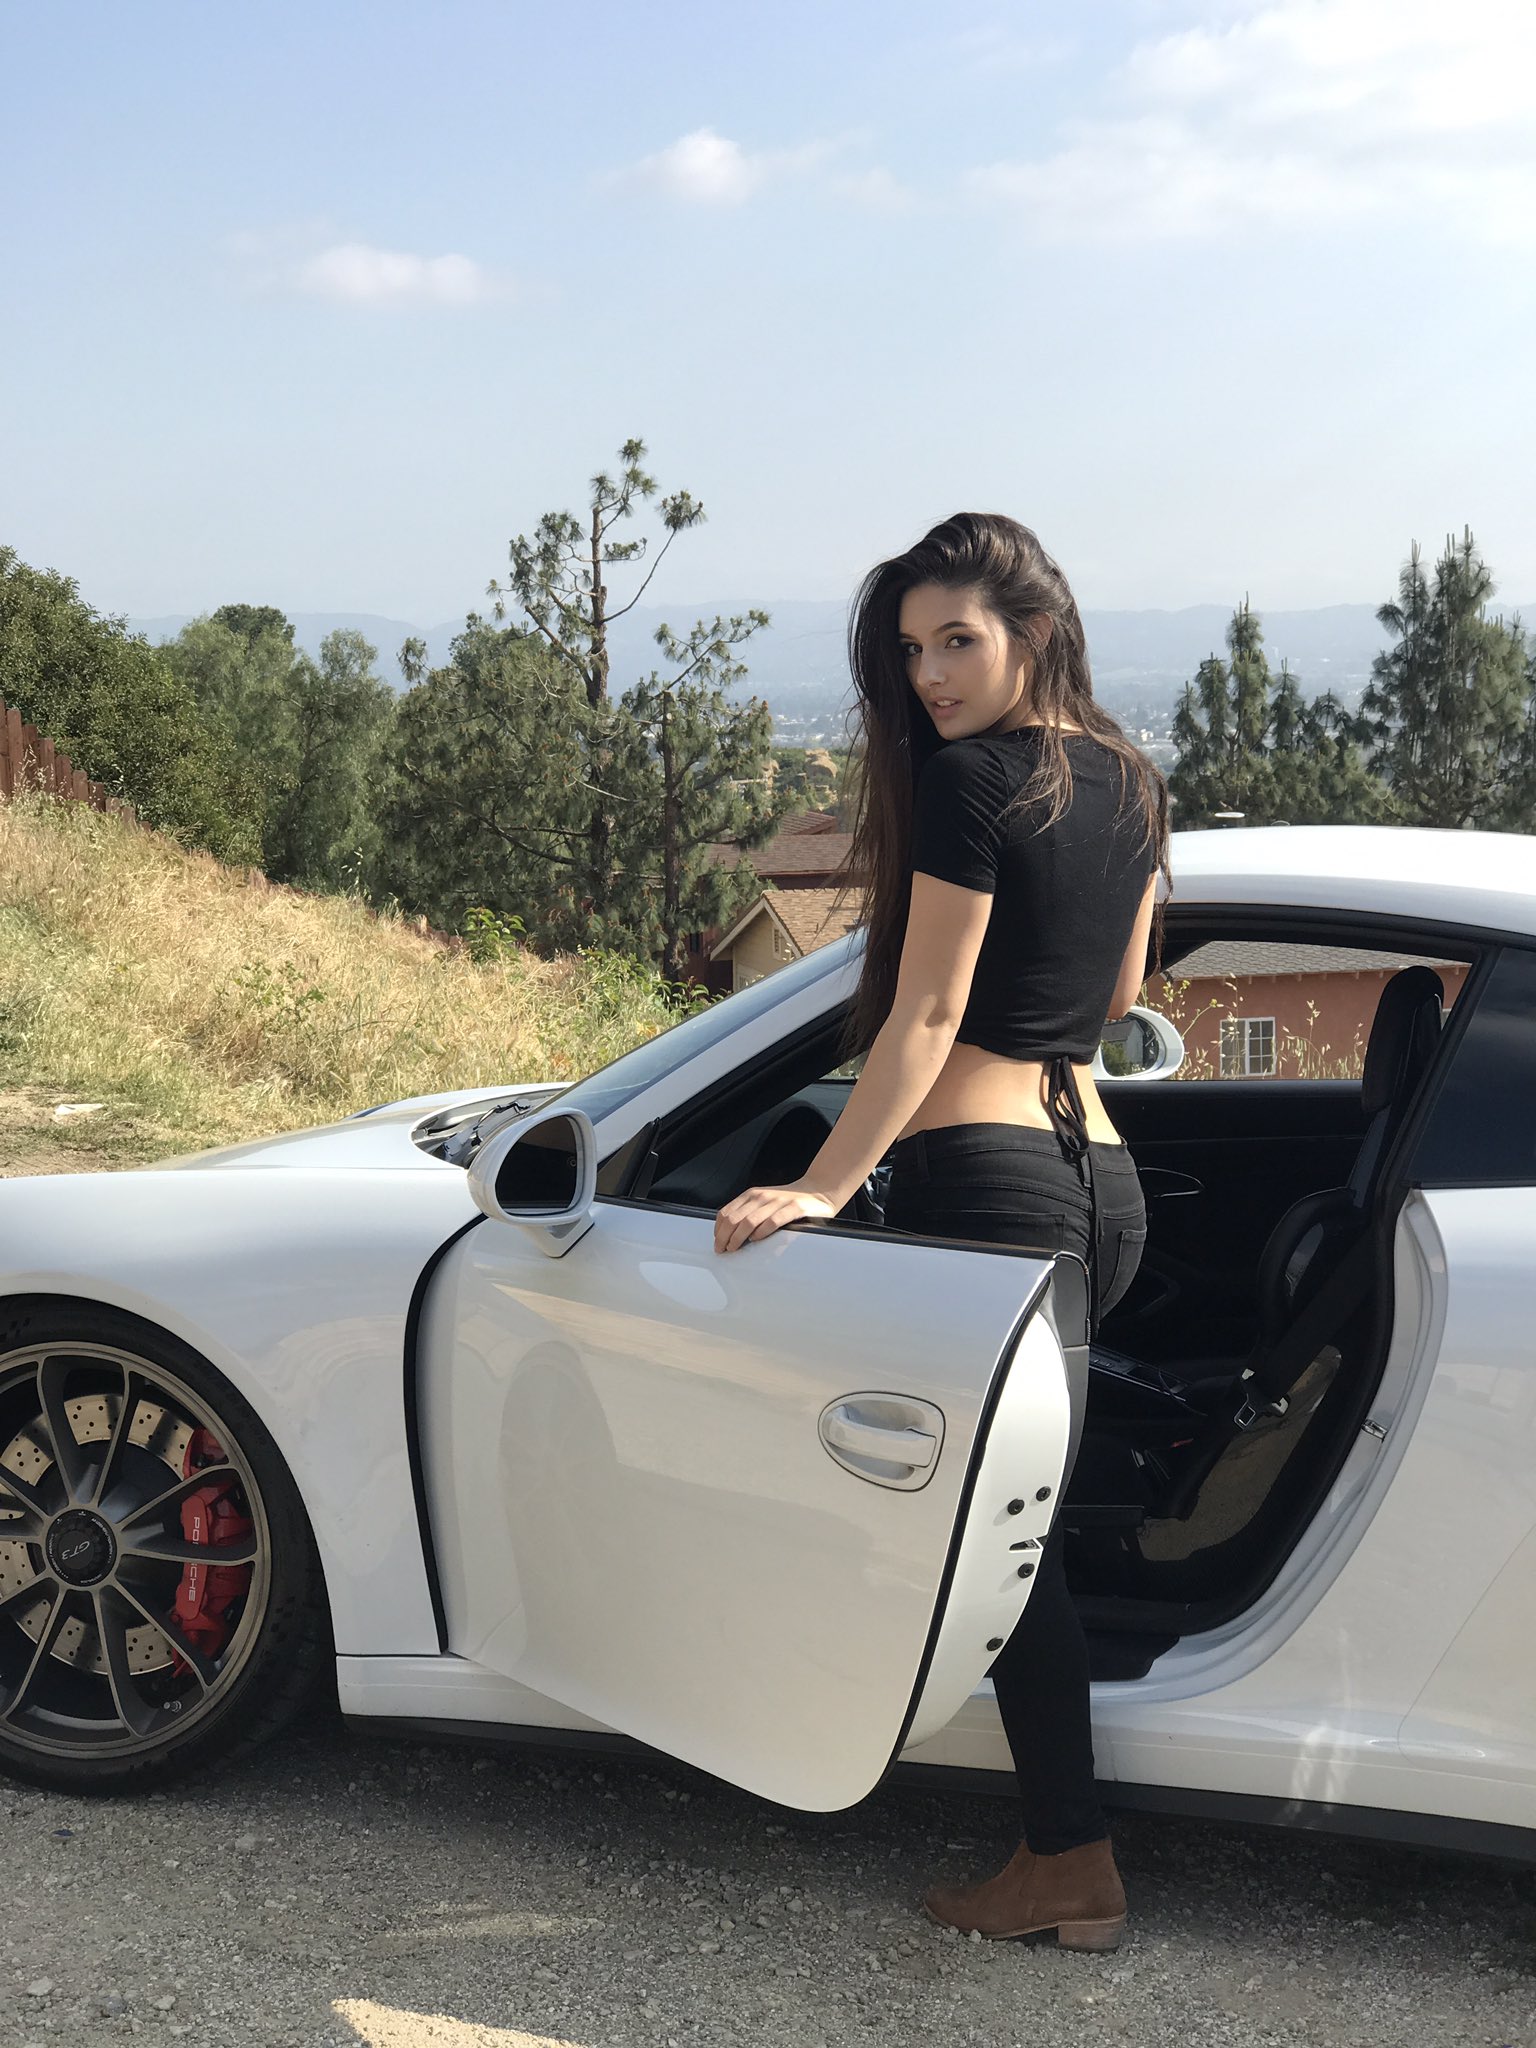 Natalie Gibson Model Looking At Viewer Women Women Outdoors Brunette Black Tops Women With Cars Blac 1536x2048